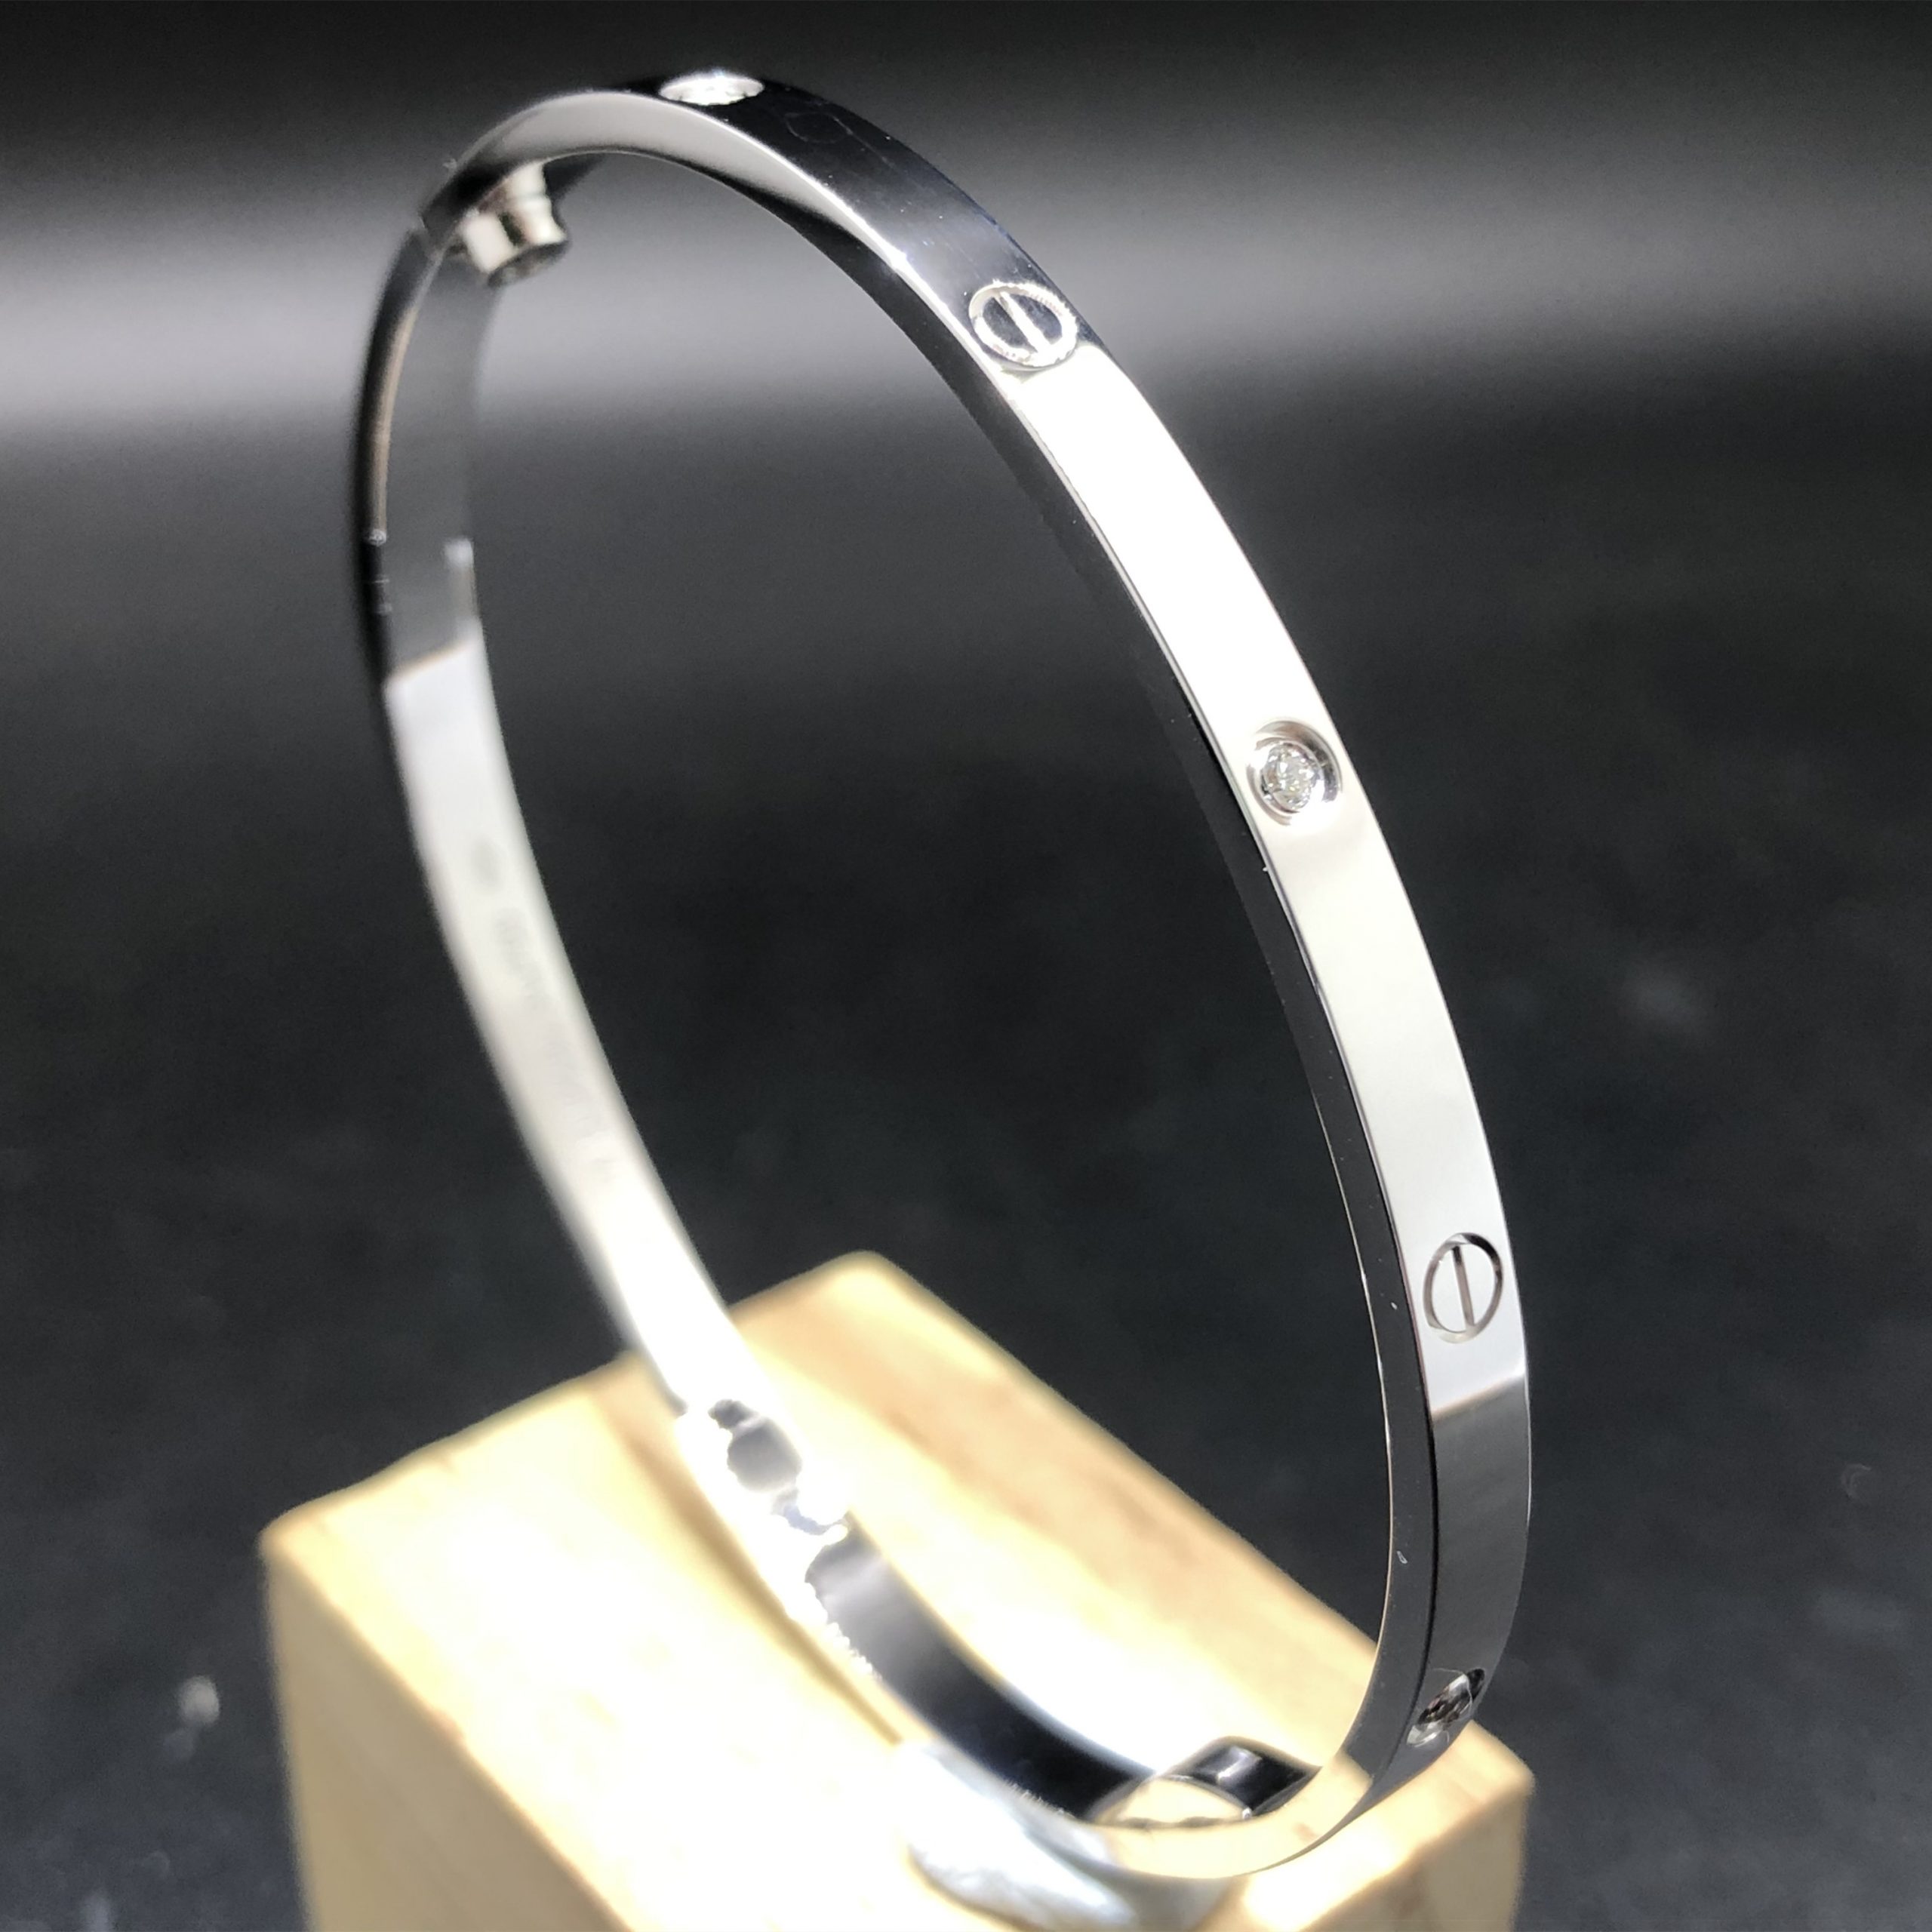 Cartier Love Small Model Bracelet Custom Made in Solid 18K White Gold with 6 Diamonds